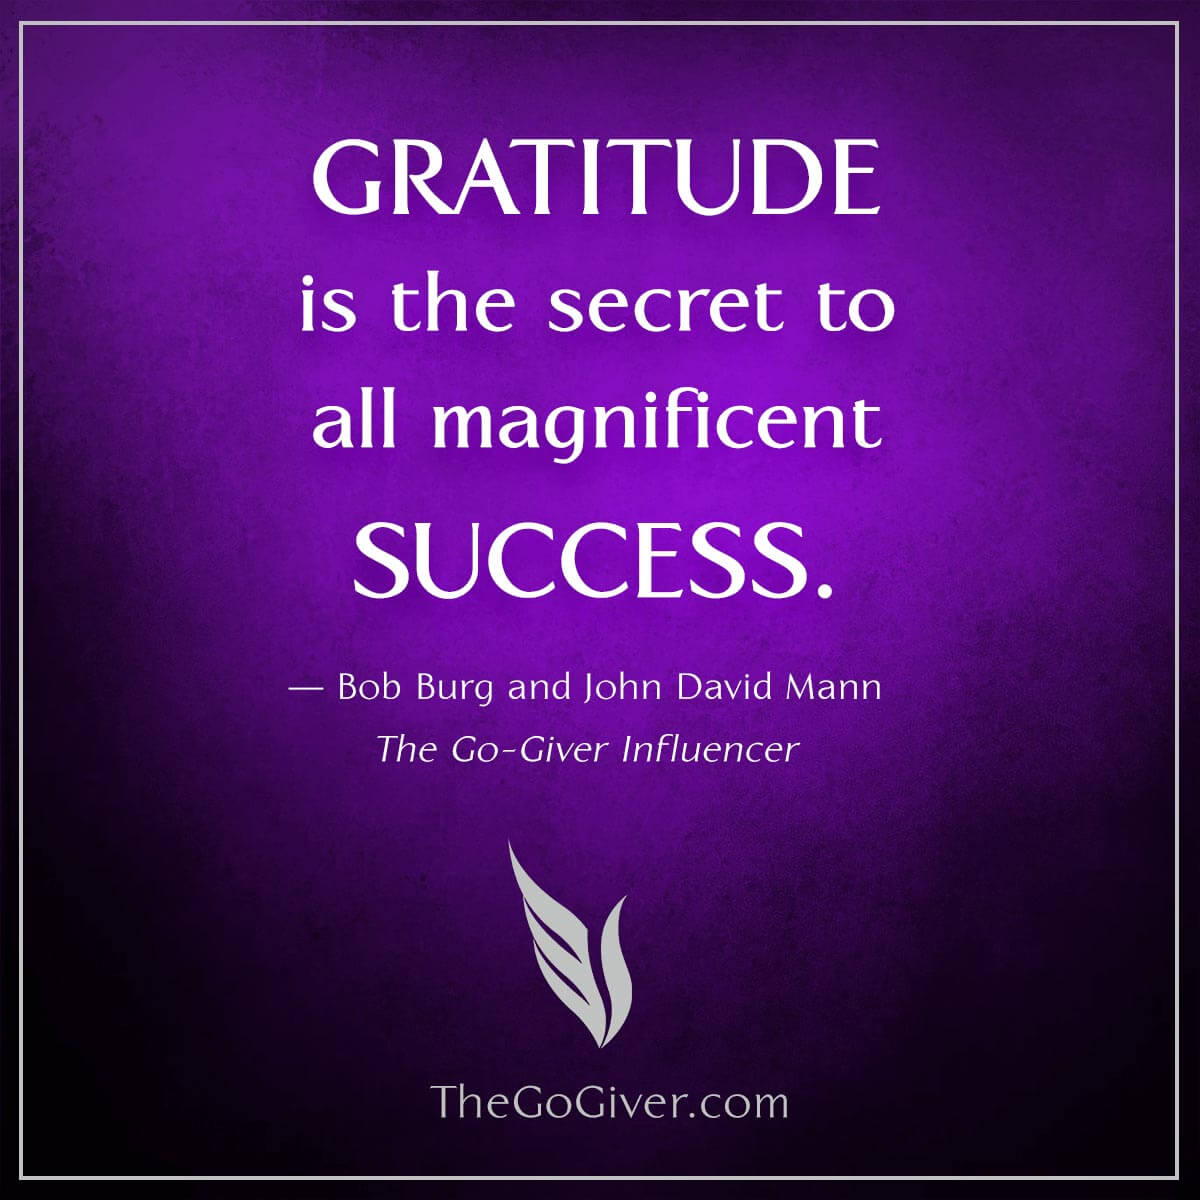 Gratitude is the secret to all magnificent success - The Go-Giver Influencer